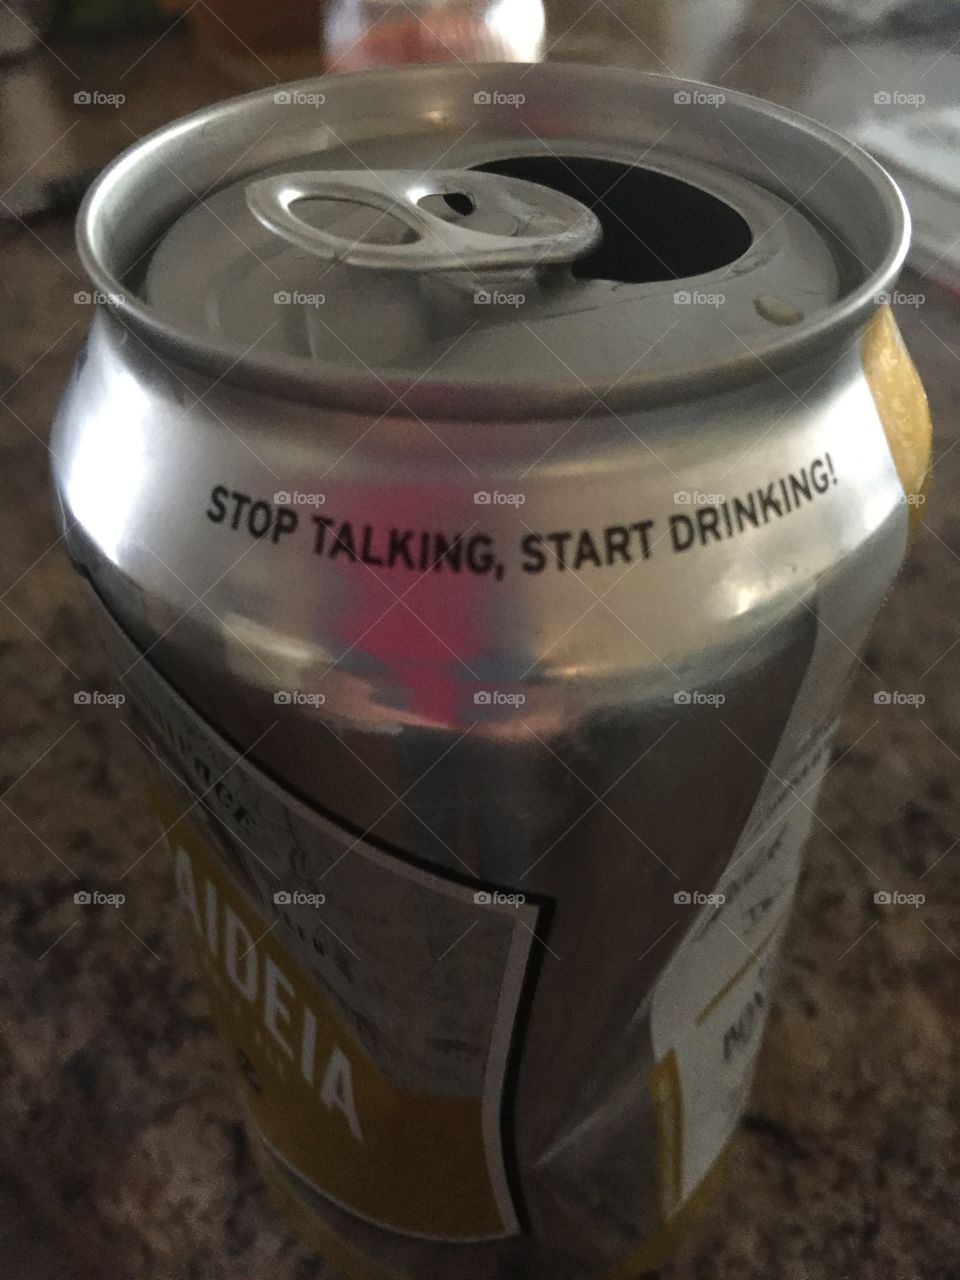 Haha stop talking and start drinking funny I would be talking more 